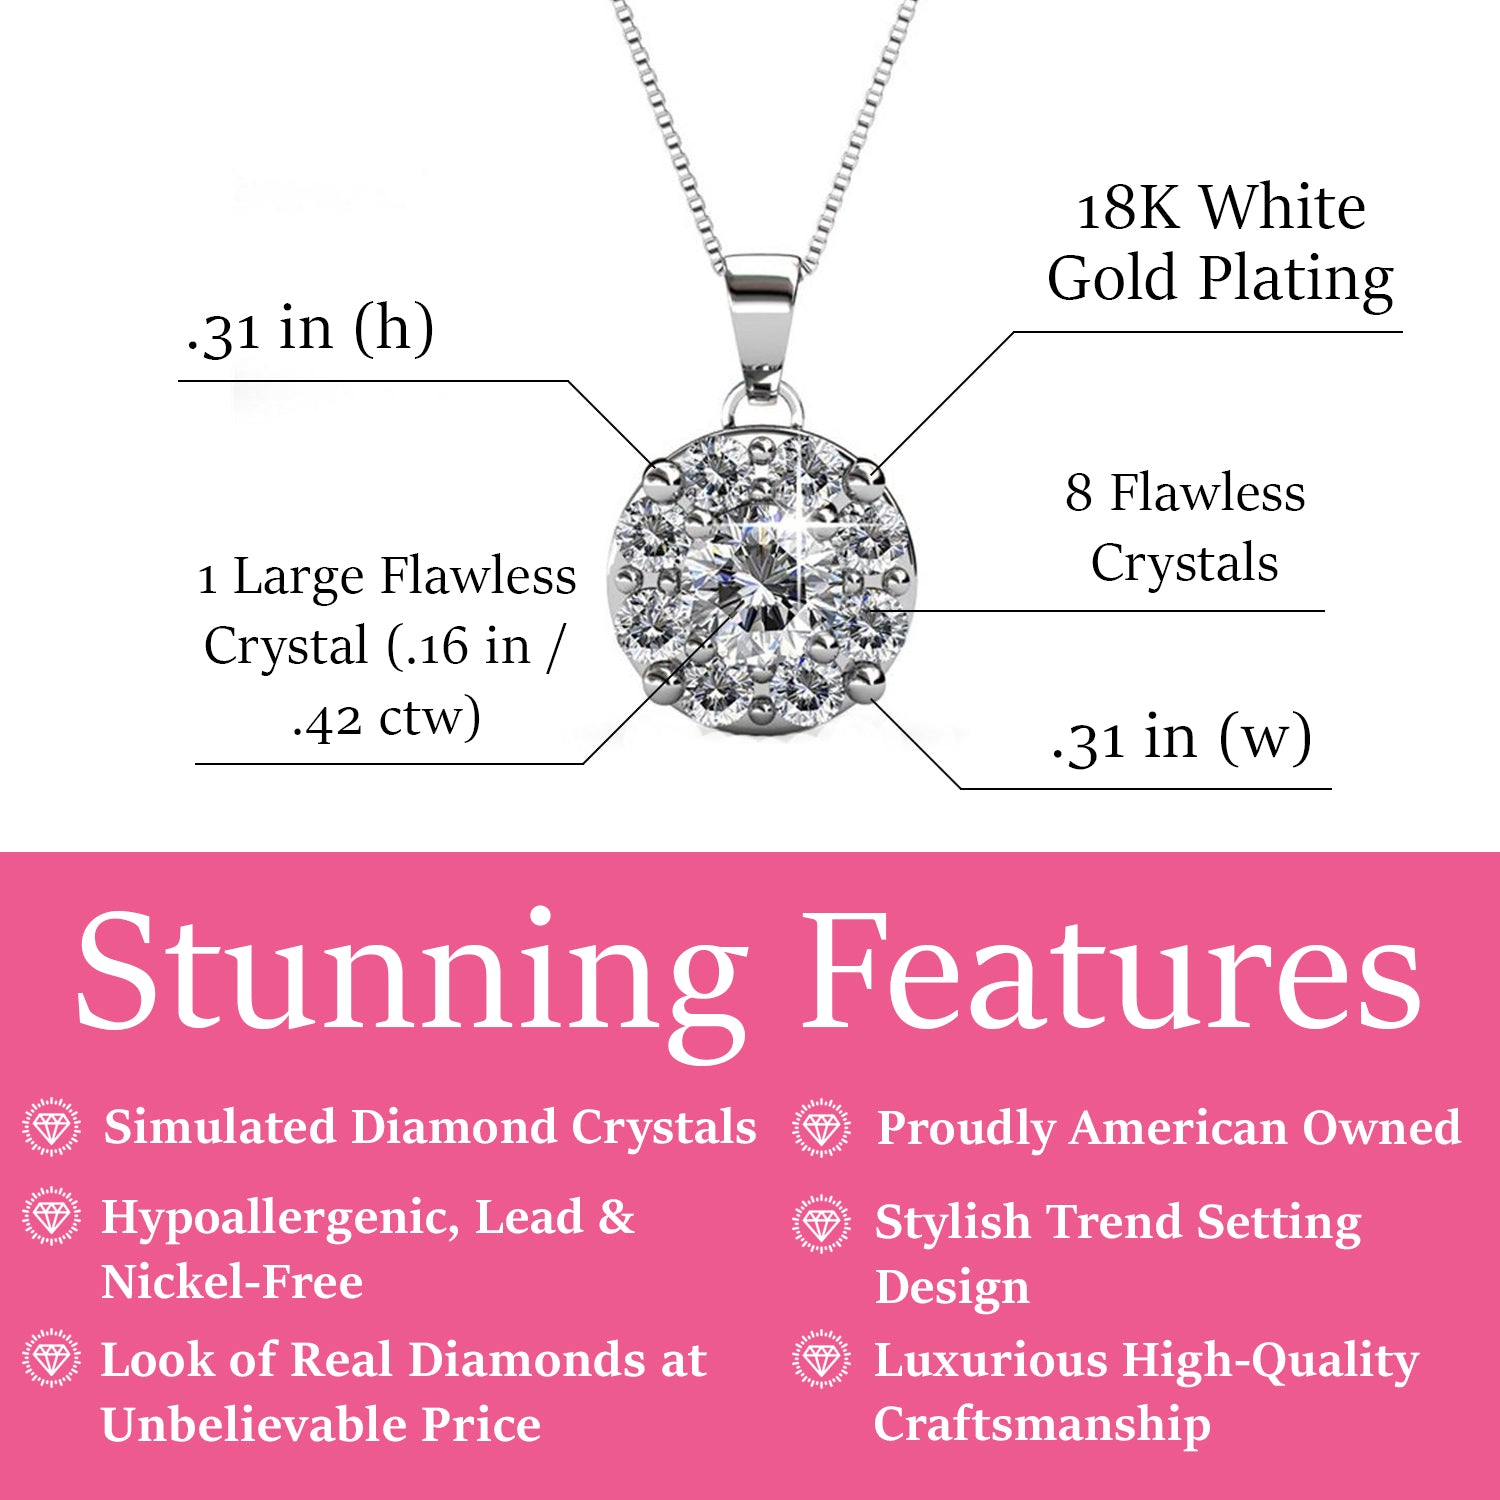 Ruth 18k White Gold Plated Silver Pendant Necklace